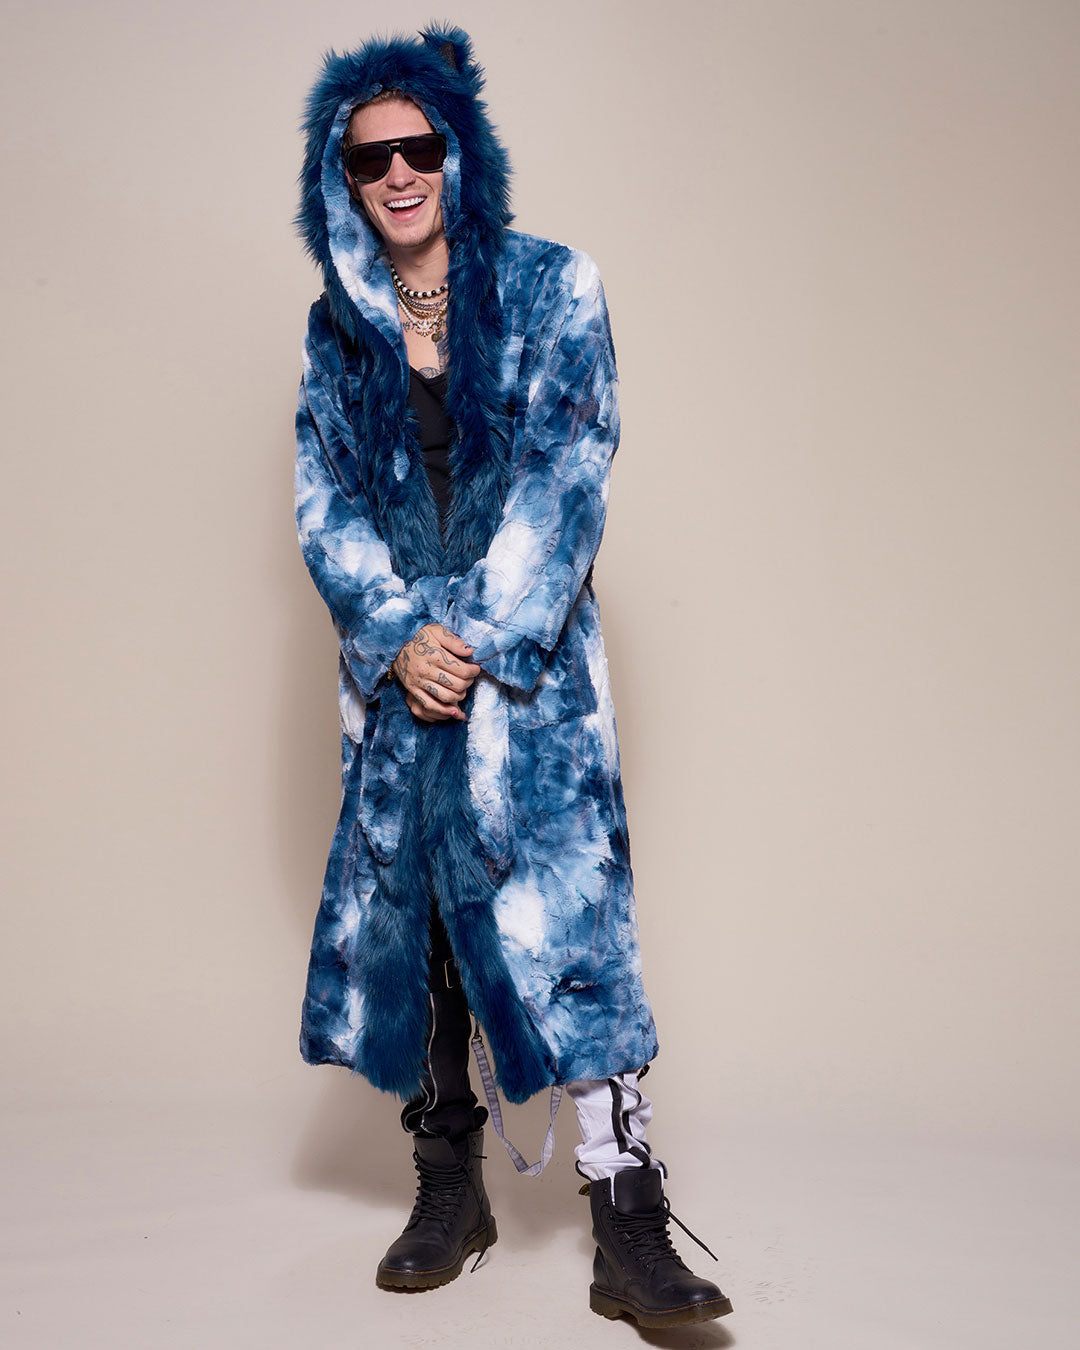 Classic Style Faux Fur Robe With Hood and Ears Featured on Male Model in Water Wolf Design